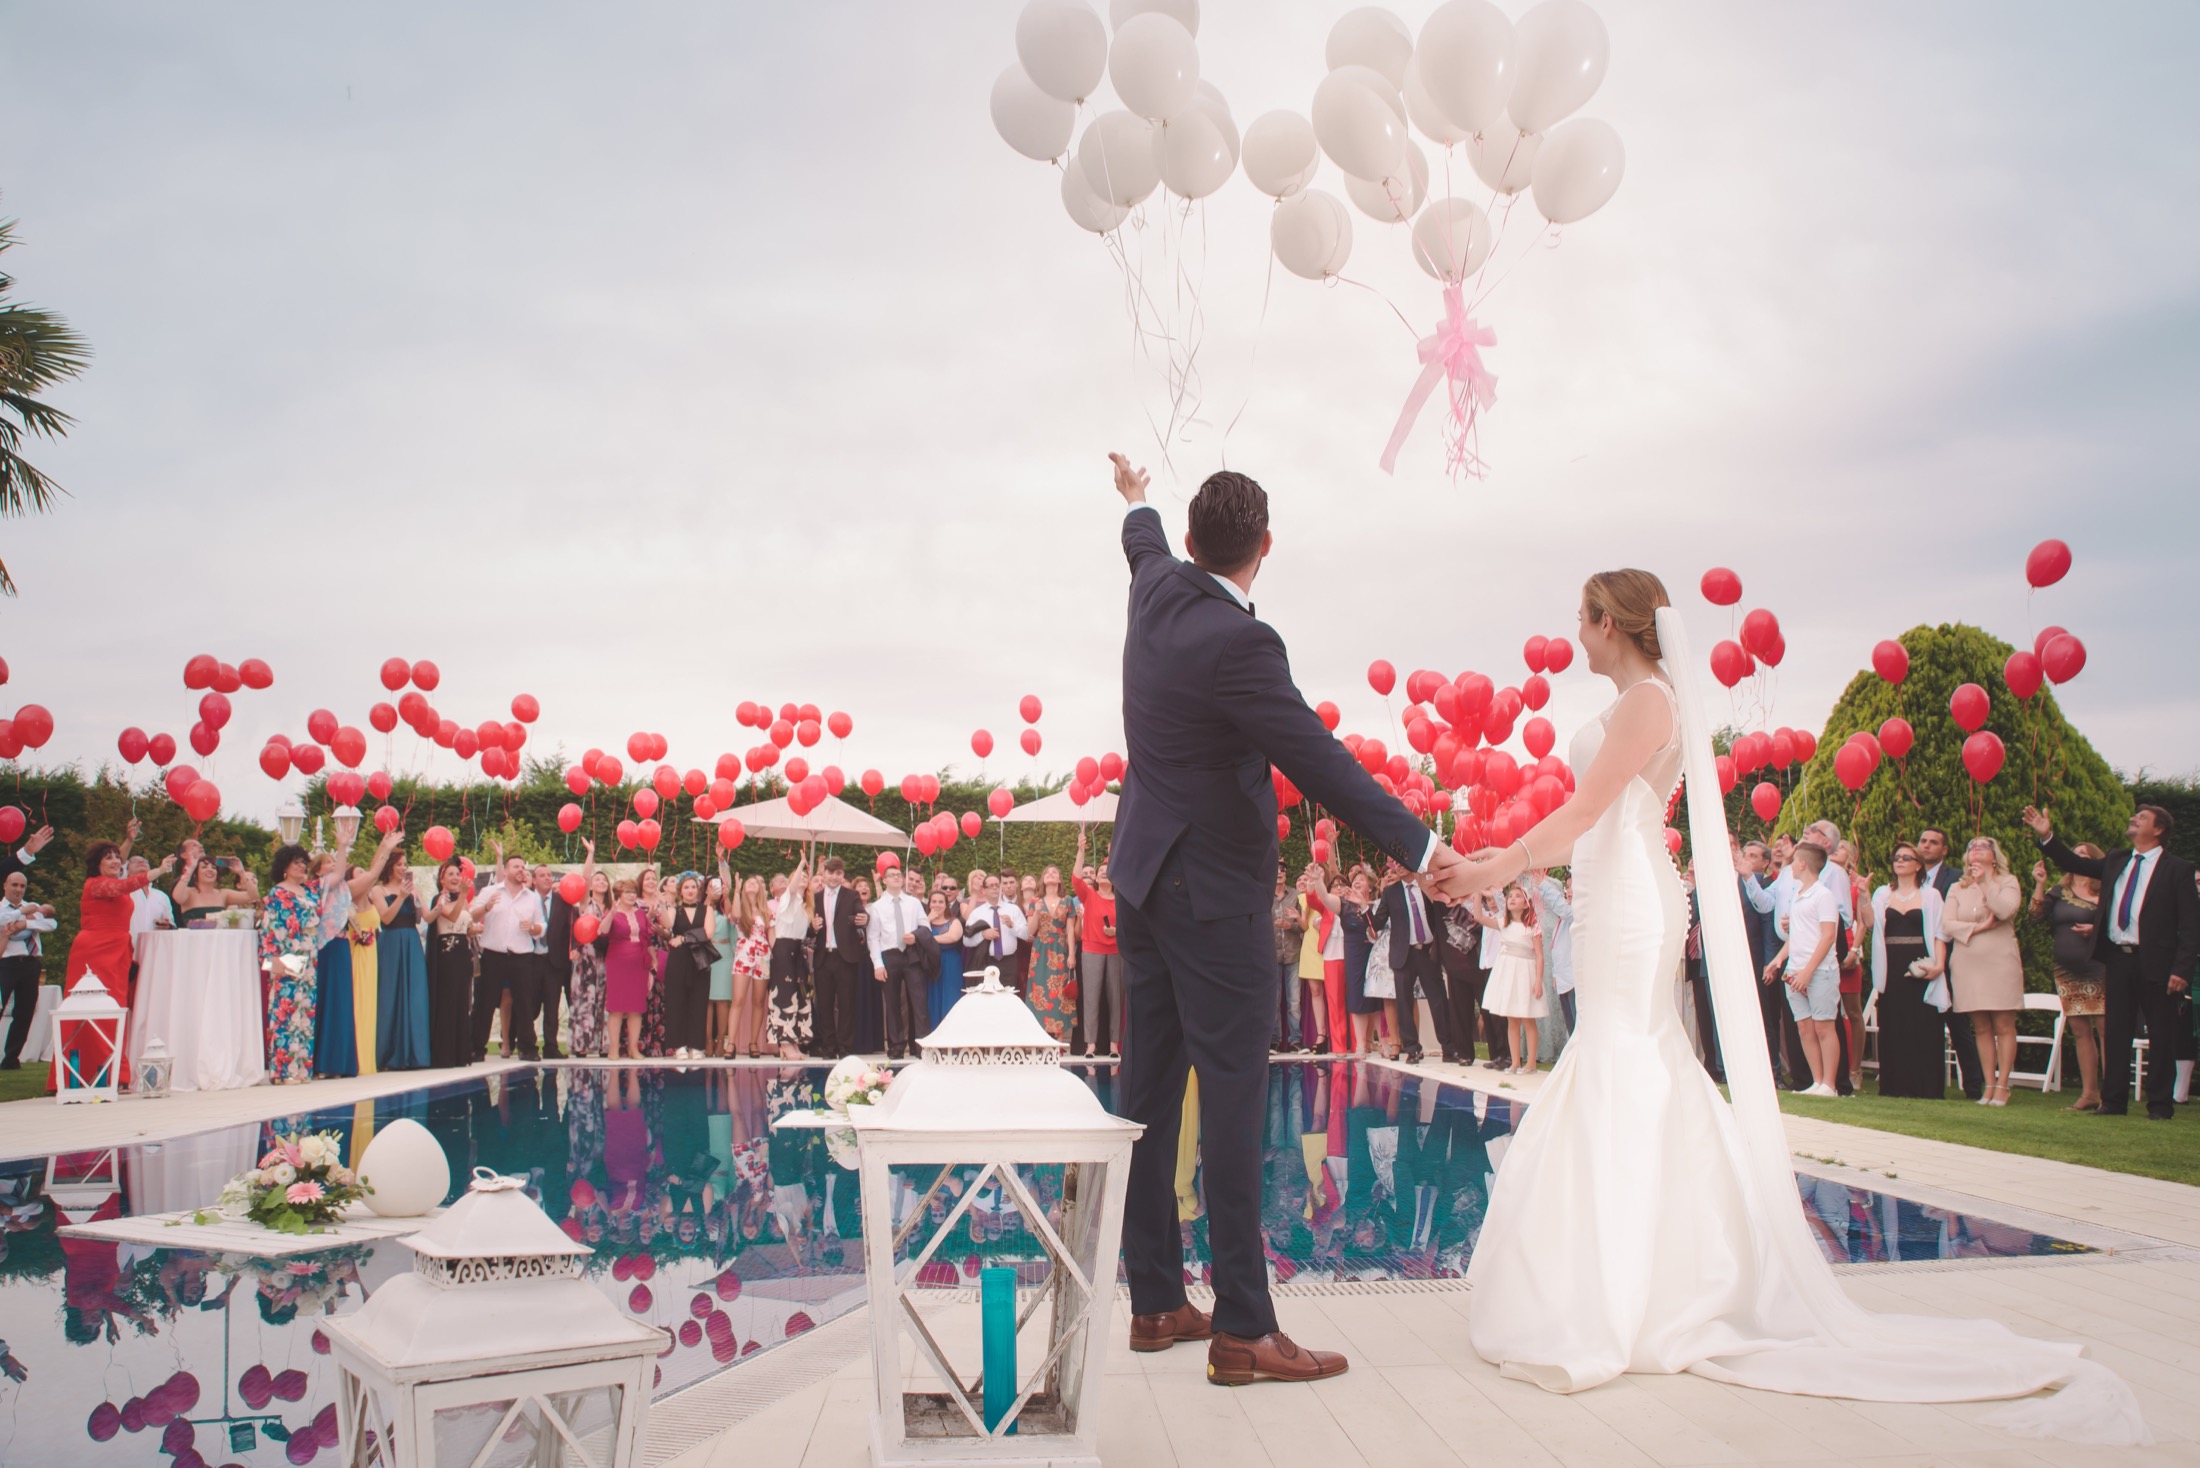 A wedding celebrating by releasing balloons